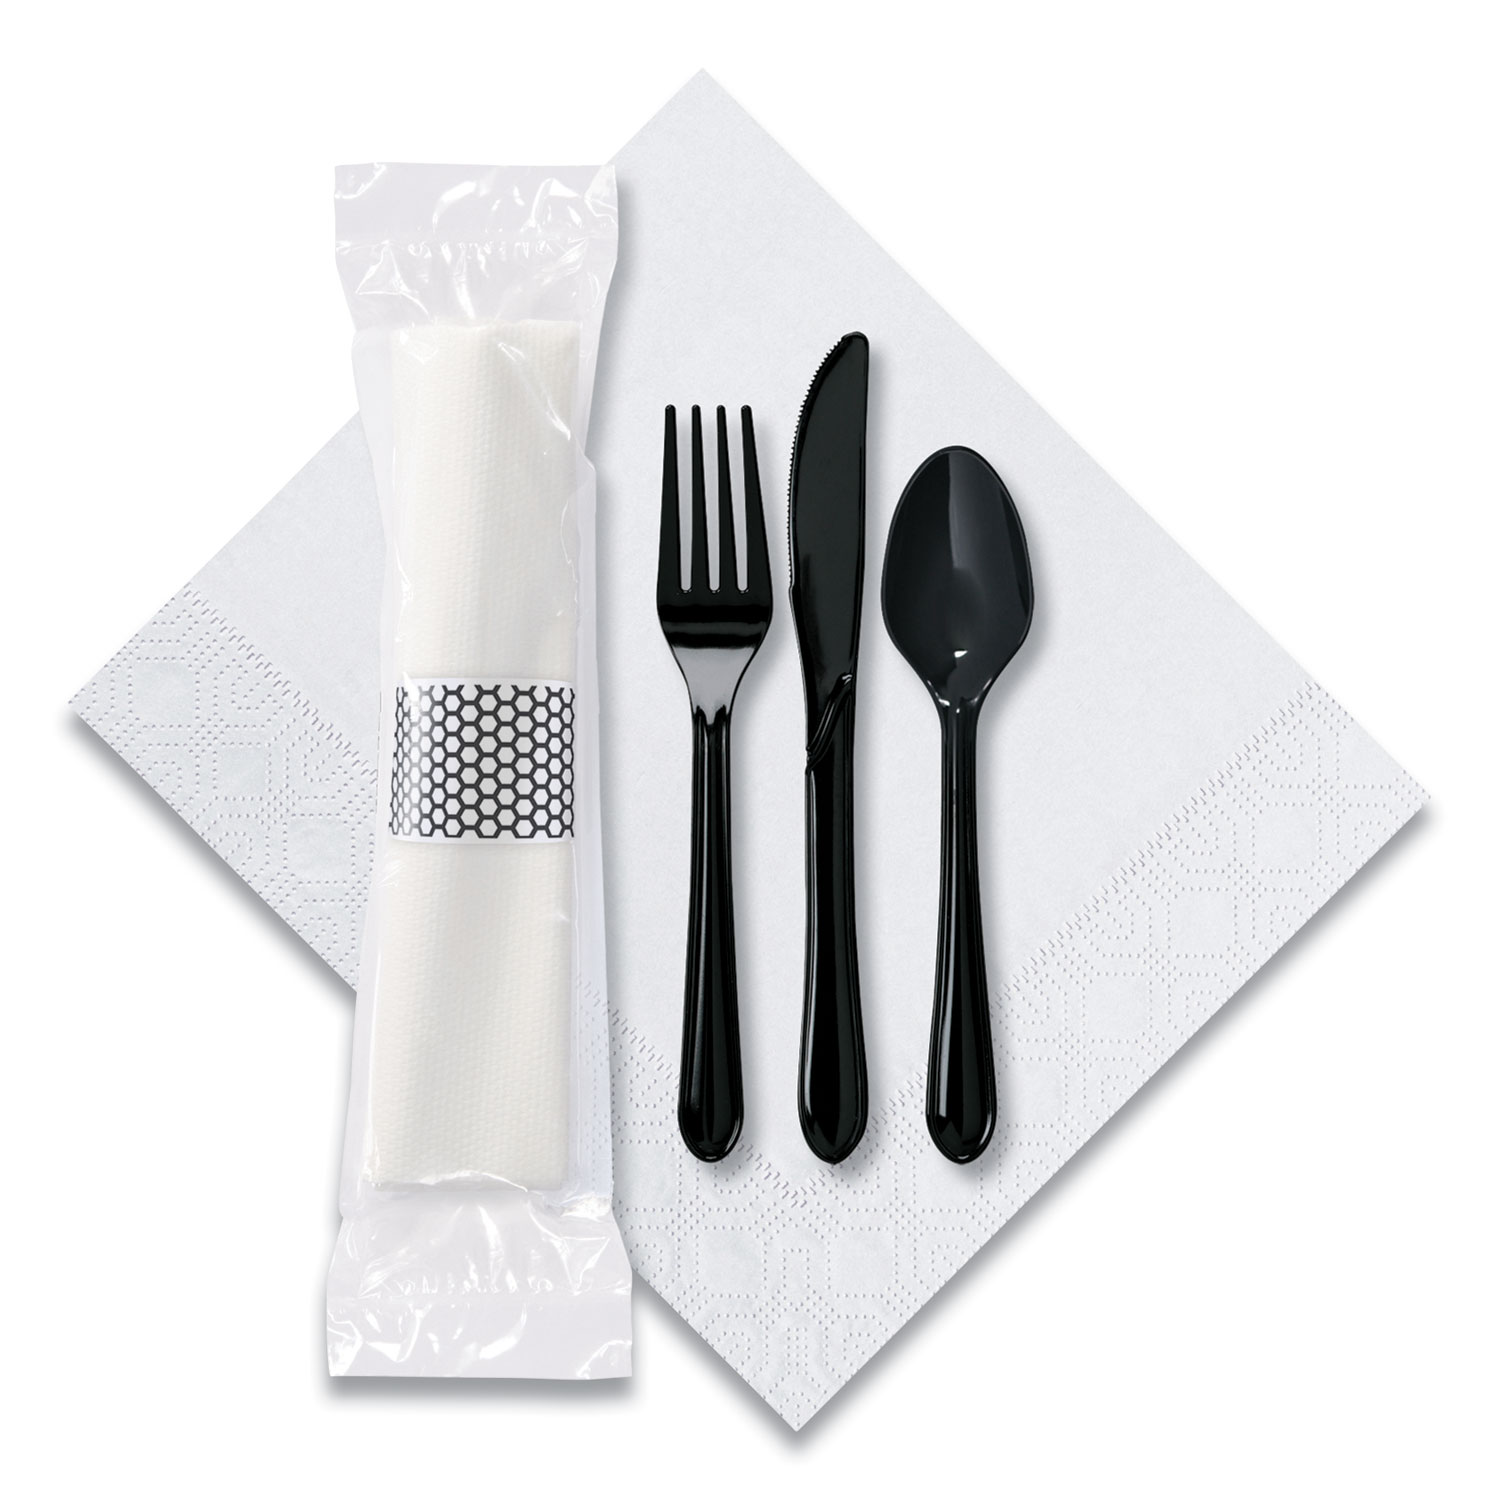  Hoffmaster 119901 CaterWrap Cater to Go Express Cutlery Kit, Fork/Knife/Spoon/Napkin, Black, 100/Carton (HFM119901) 